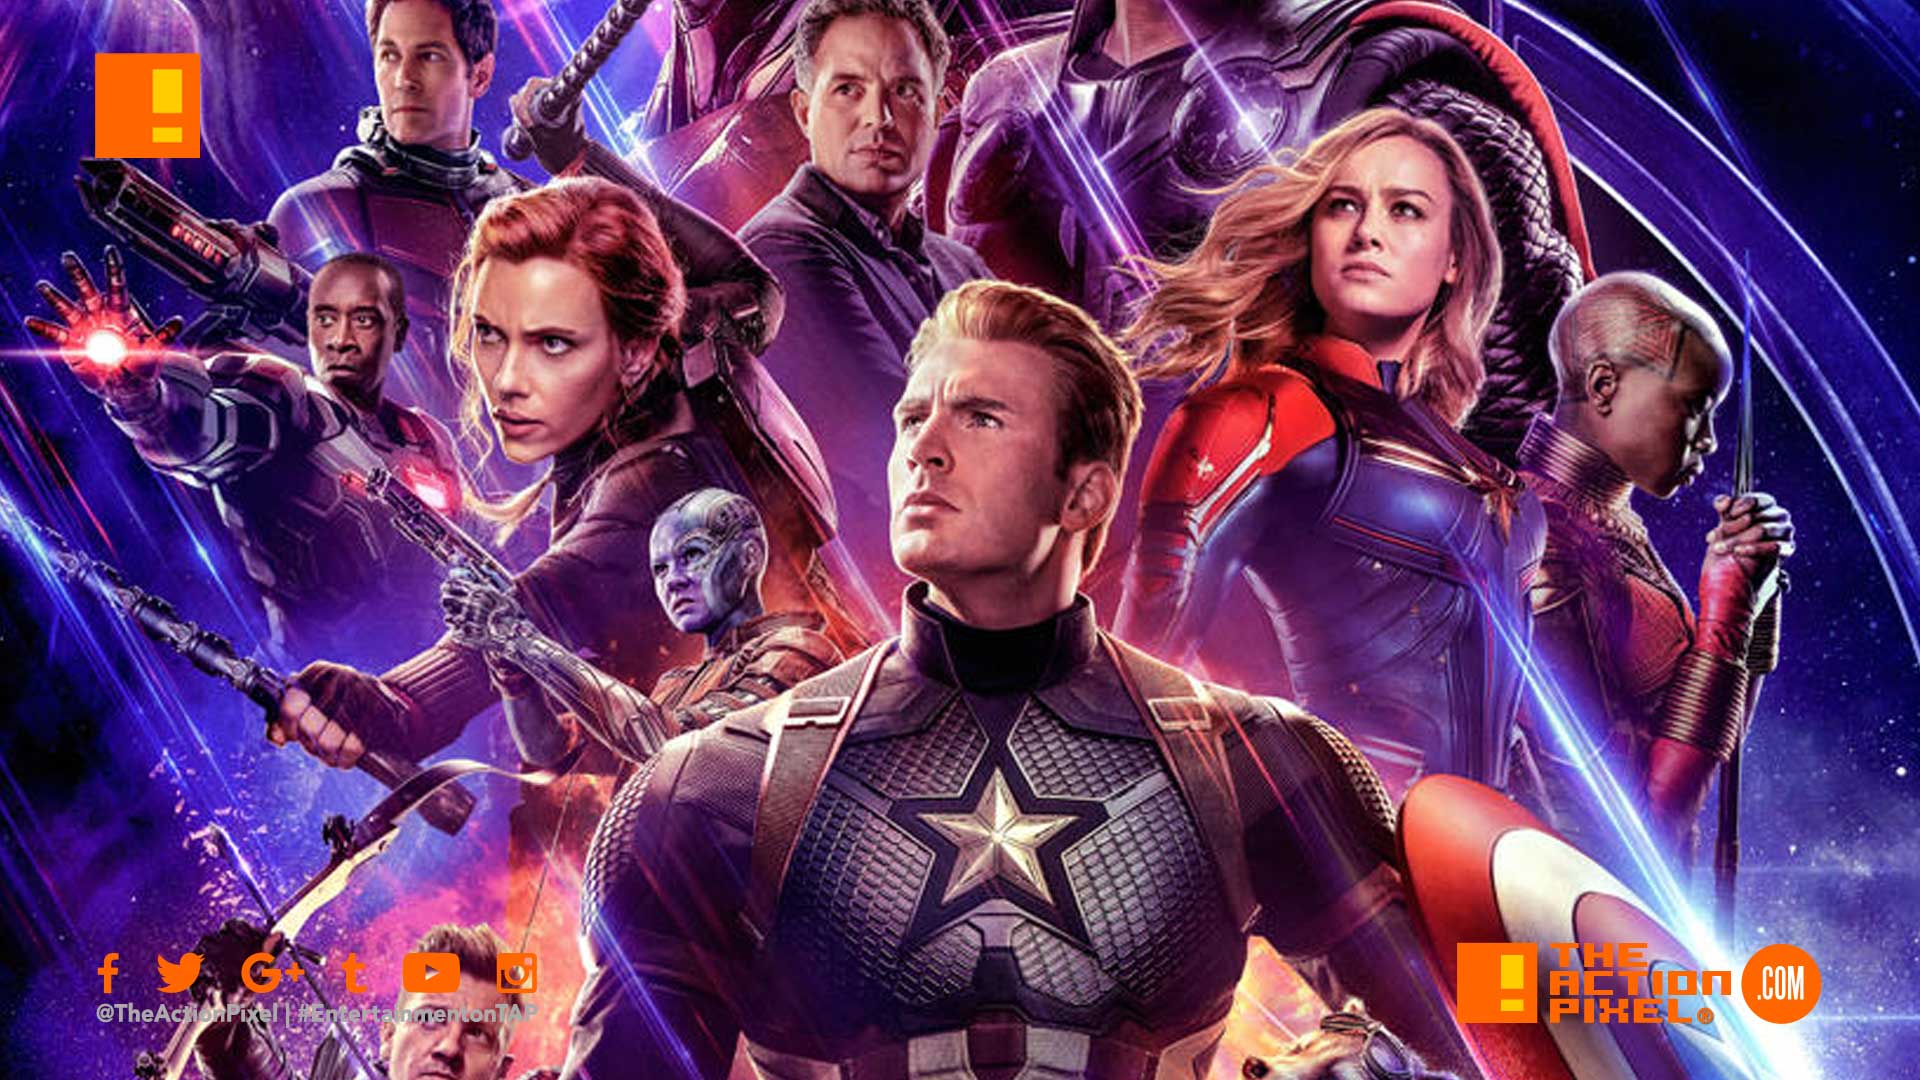 hawkeye,avengers: end game, tappolls,avengers 4, the action pixel, entertainment on tap, avengers, iron man, hawkeye, poster, big game , tv spot, avengers poster 2, avengers endgame official trailer, featured,